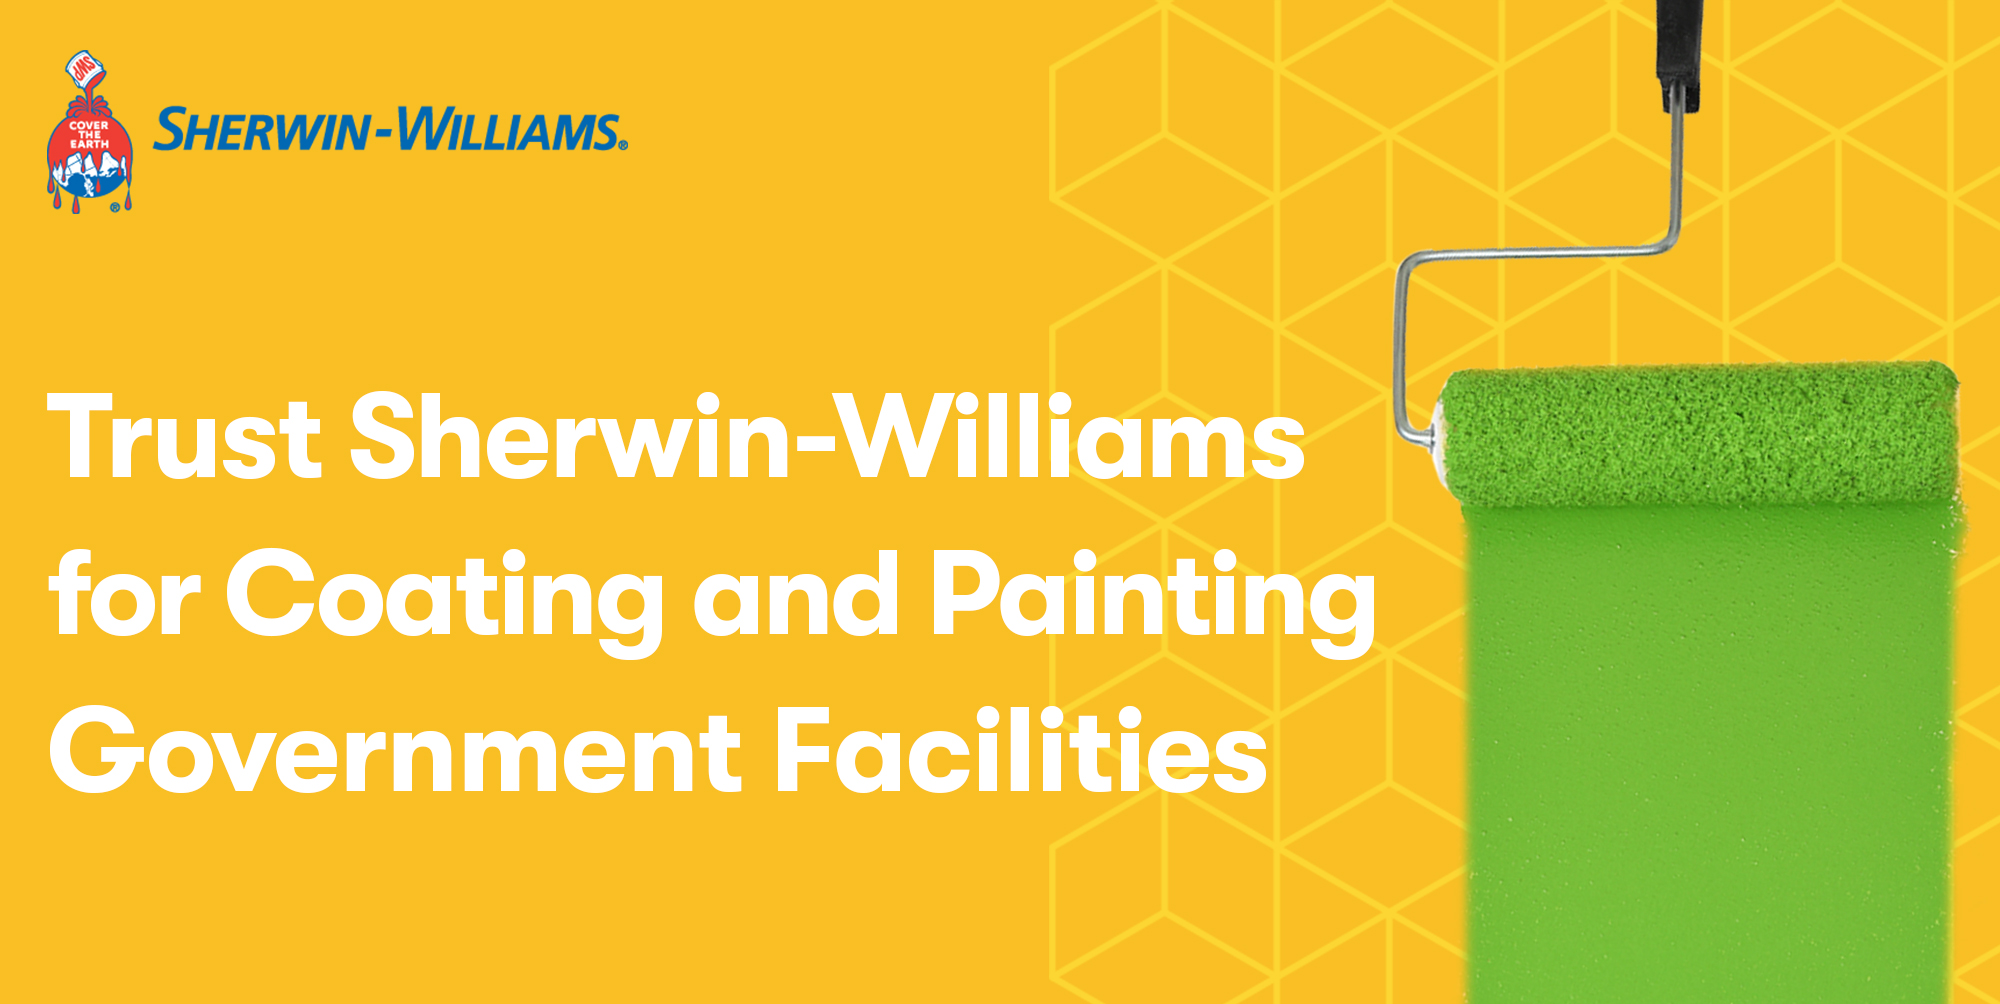 Trust Sherwin-Williams for Coating and Painting Government Facilities